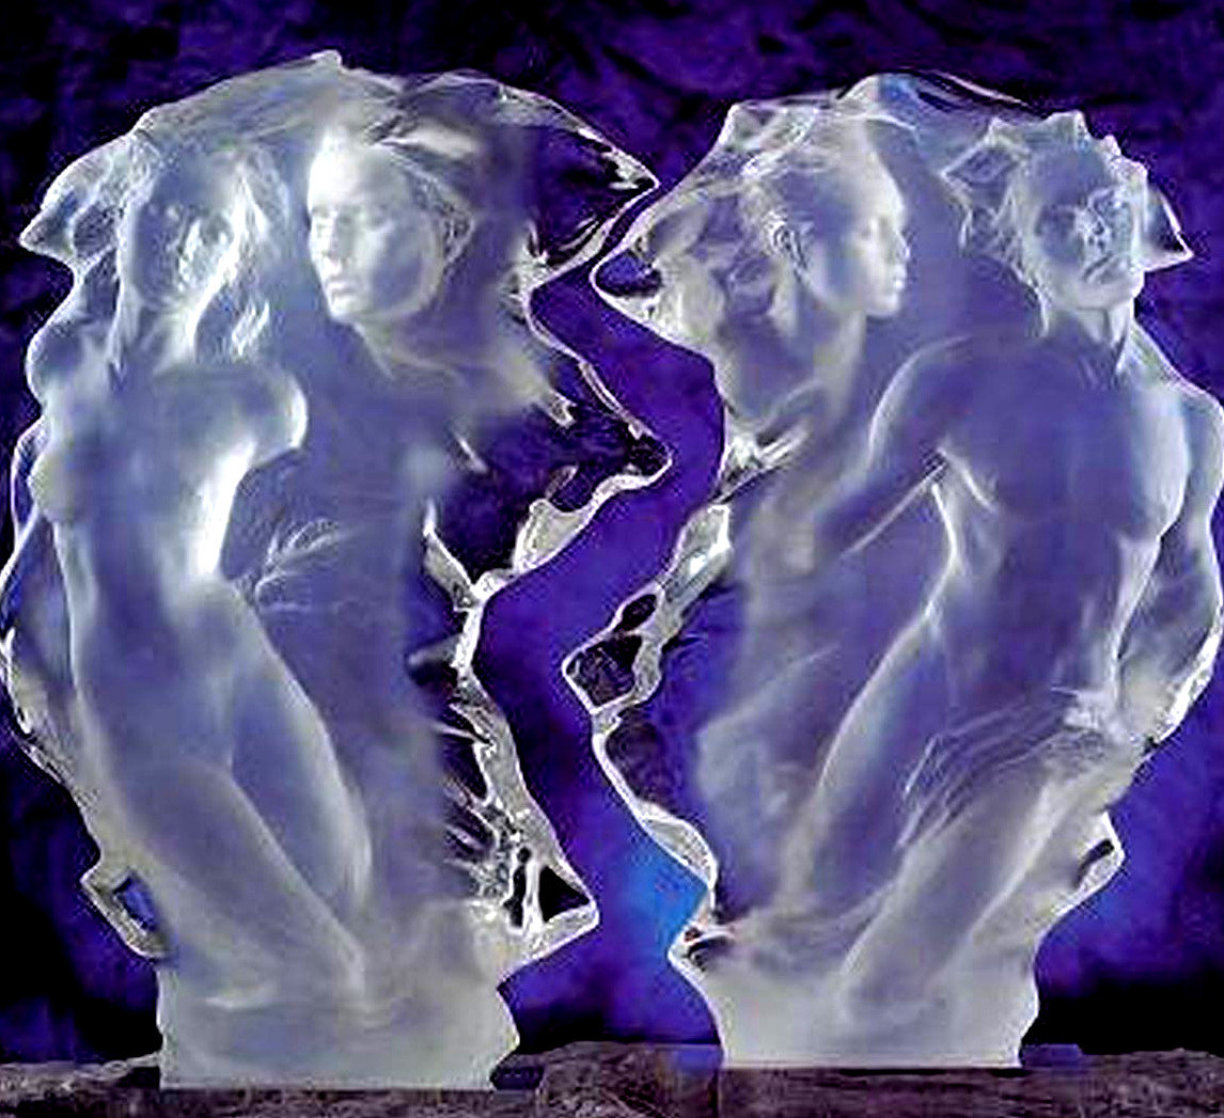 Duets - Half Life - Set of 2 Acrylic Sculpture 1996 24 in Sculpture by Frederick Hart